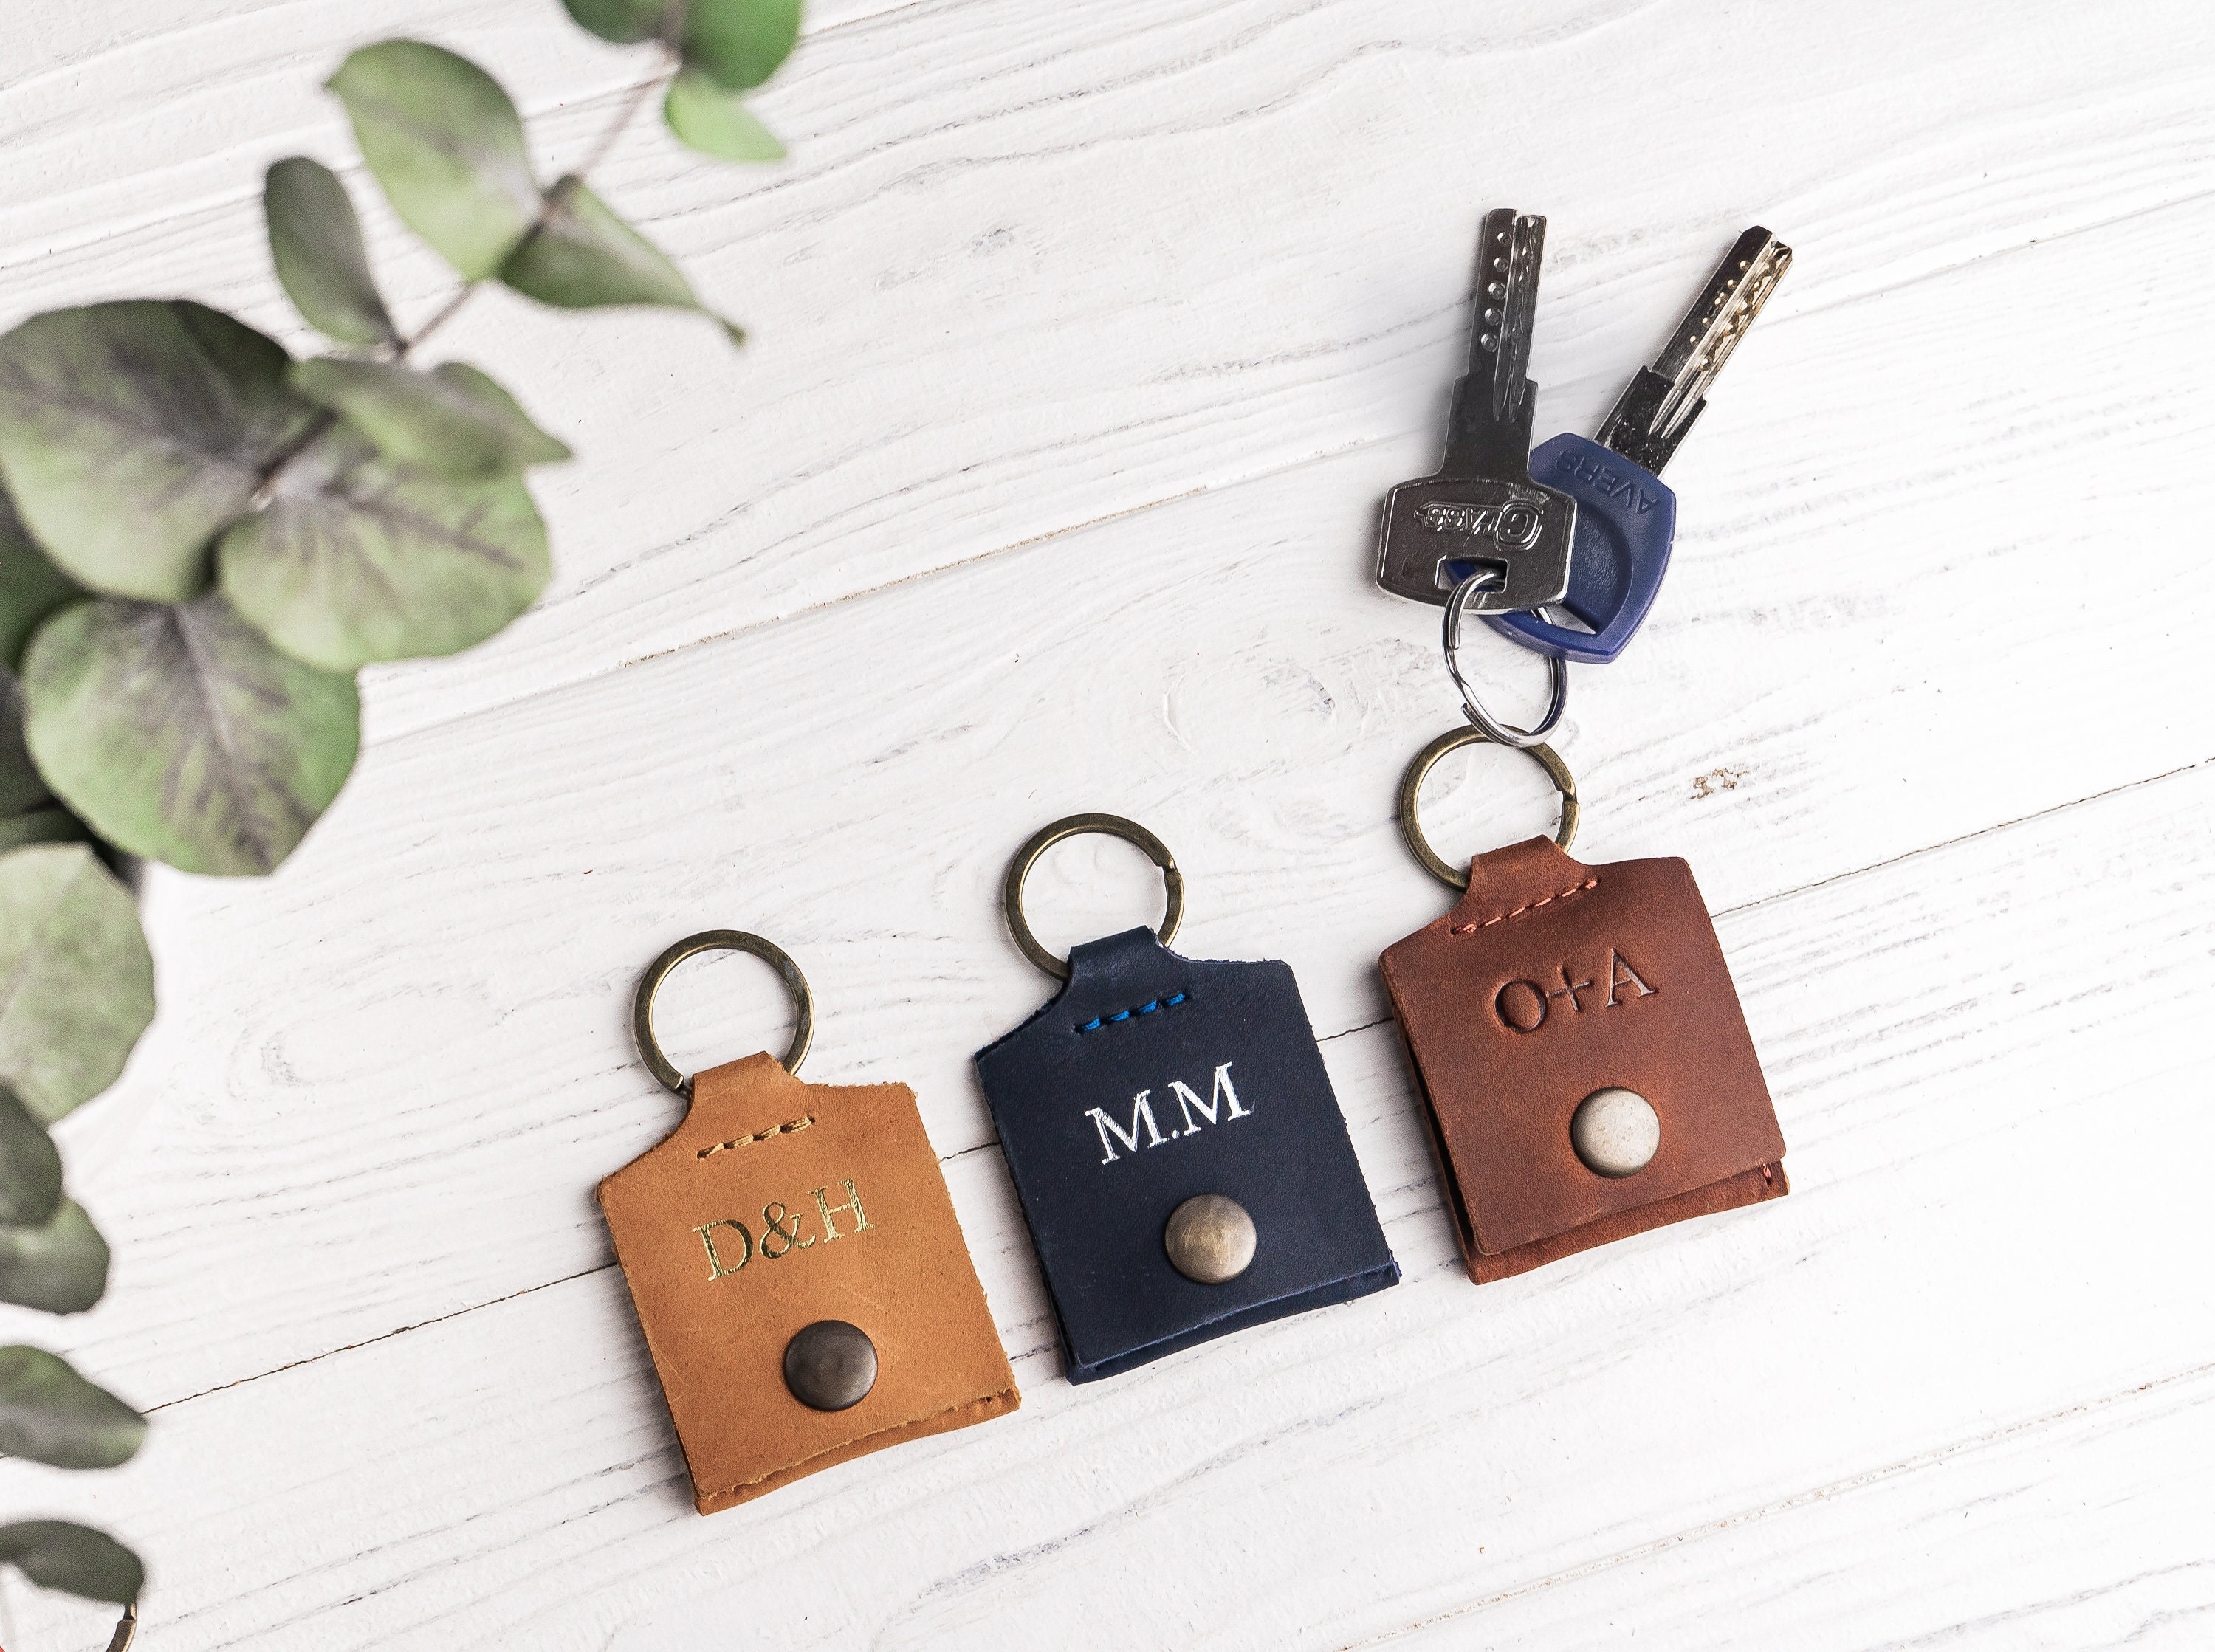 Monogrammed Leather Circle Leather Key Ring Holder Bracelet With Mini Bag  Hot Selling Keyring Holder From Isang, $3.43